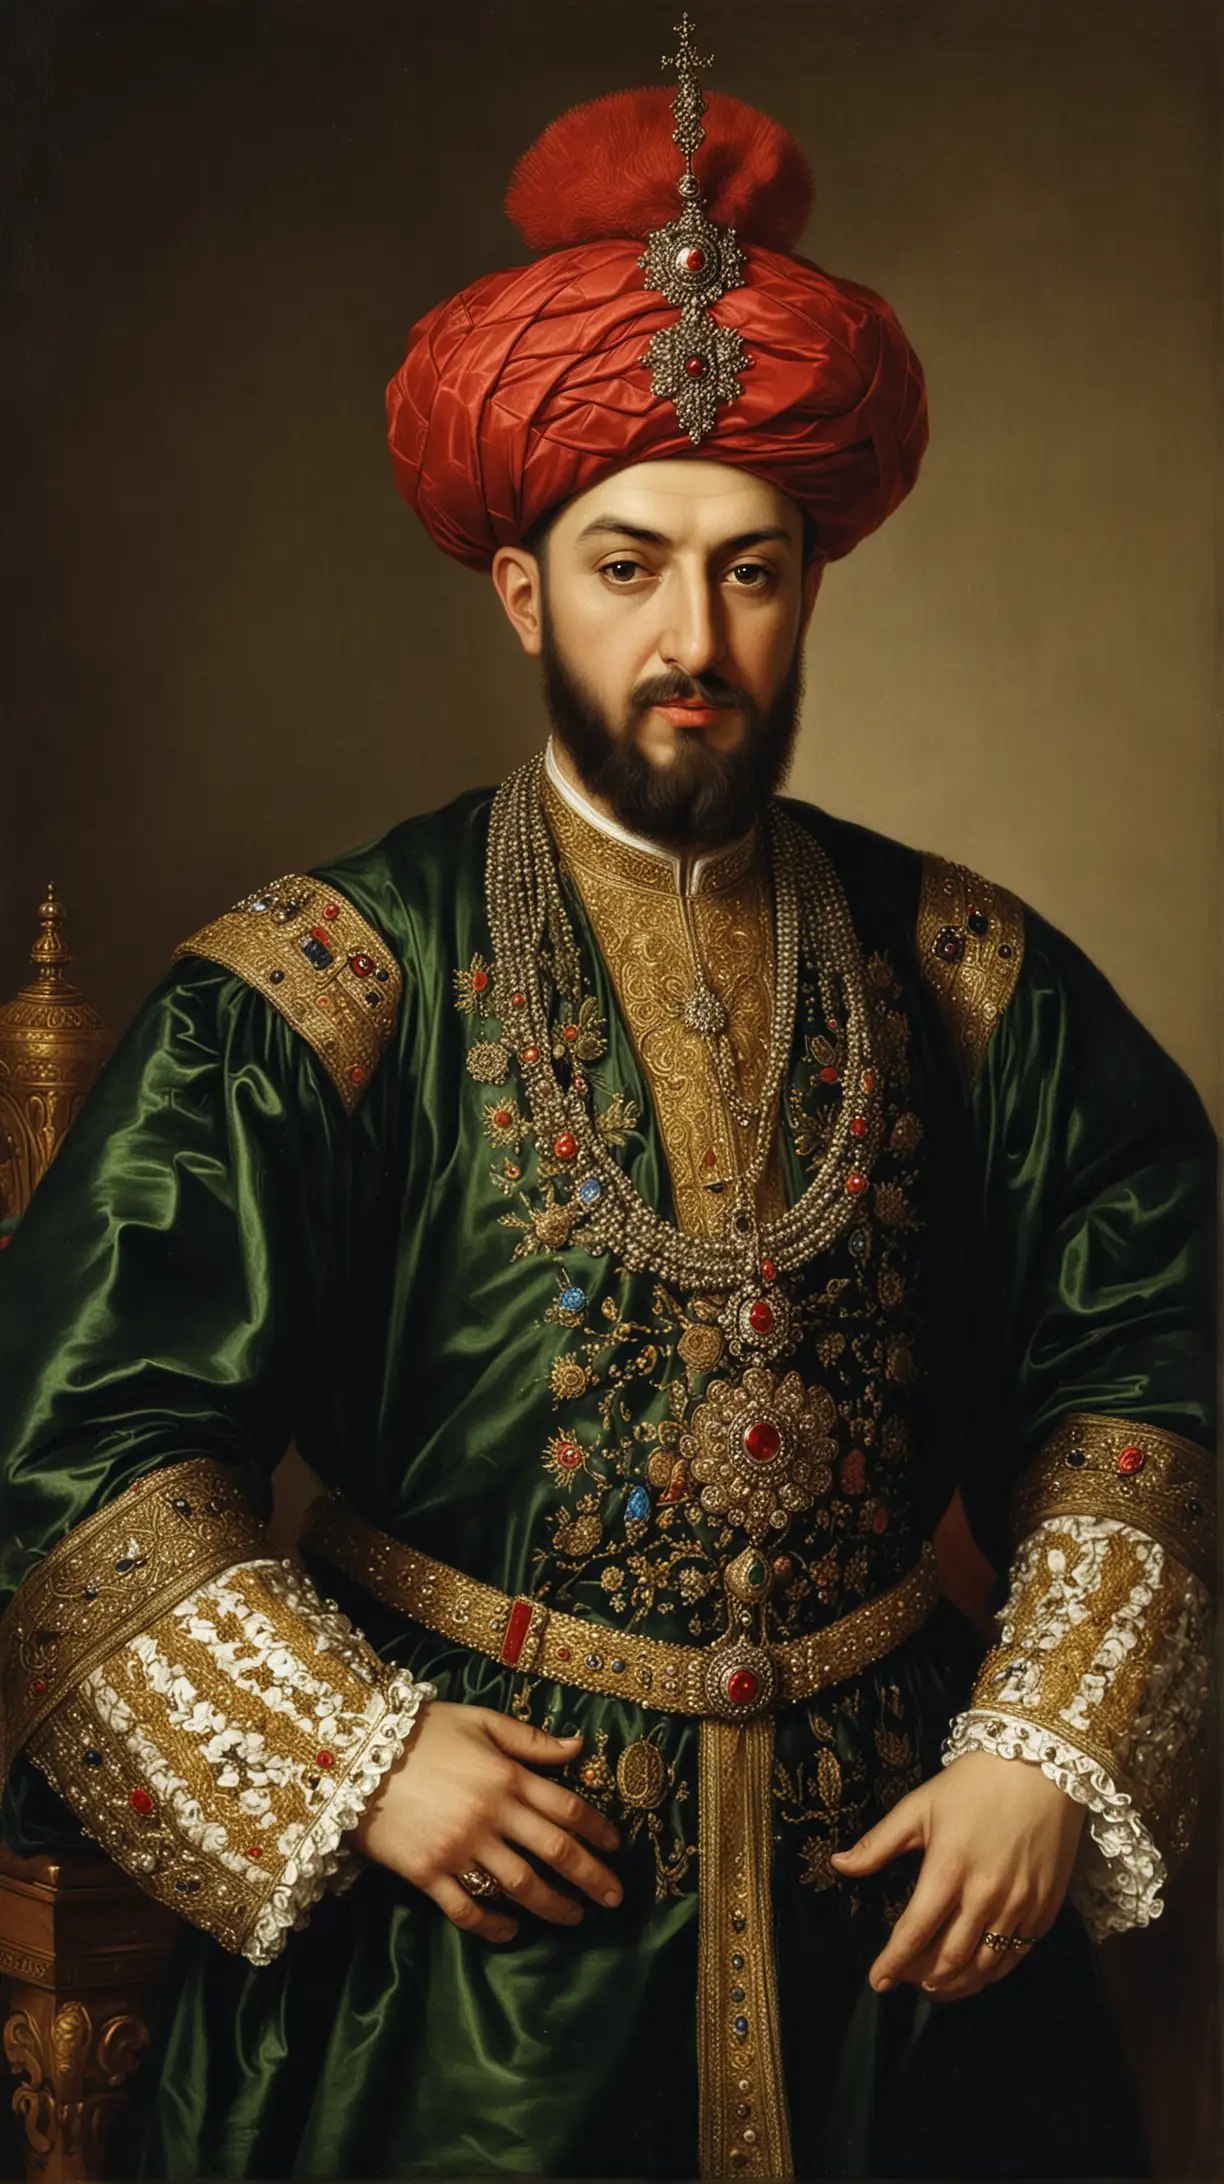 Portrait of Sultan Suleiman the Magnificent
Caption: Sultan Suleiman II, one of the most influential rulers of the Ottoman Empire during the 16th century.